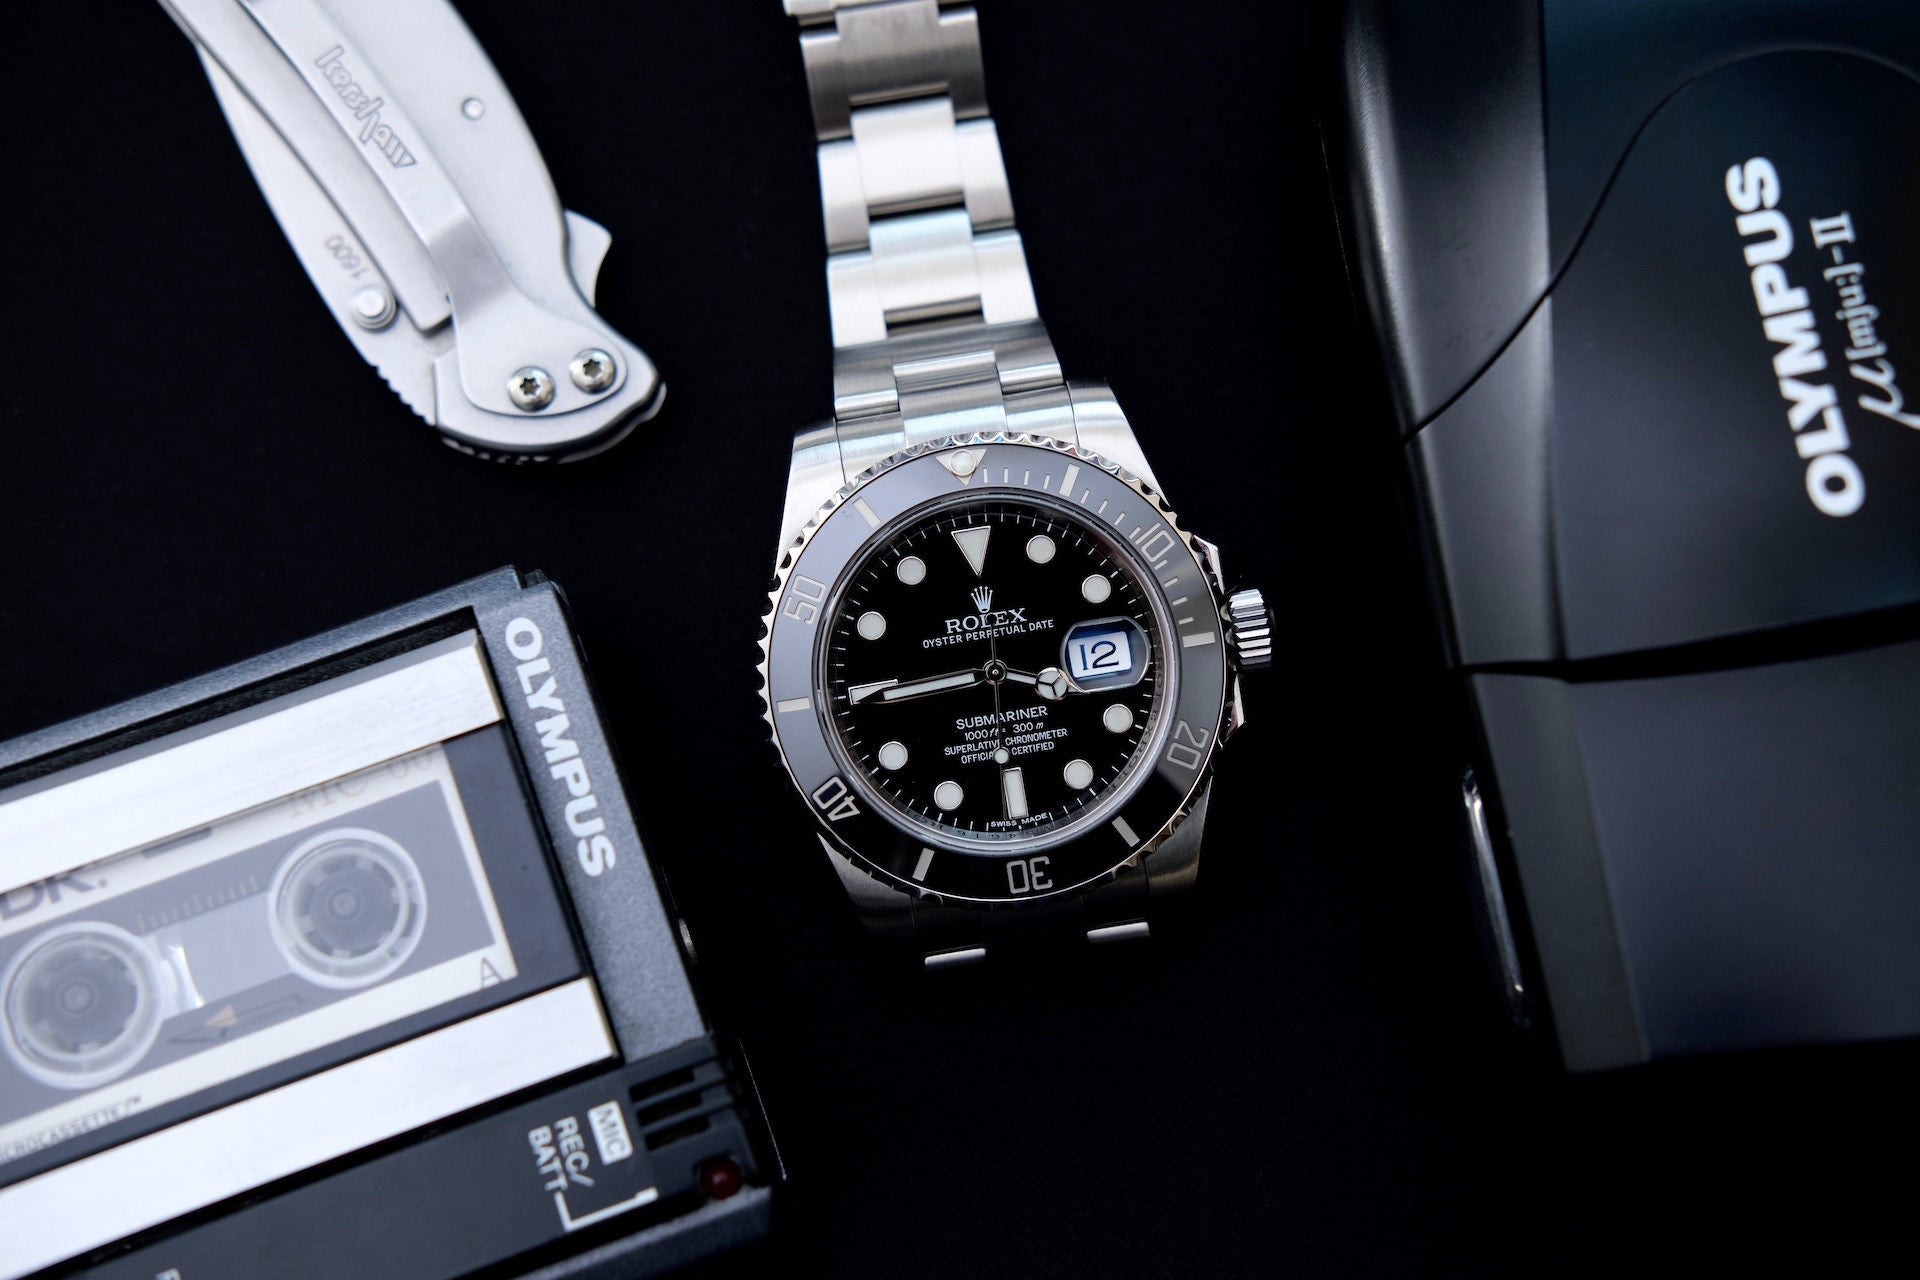 Pre-Owned Rolex Watches in Los Angeles